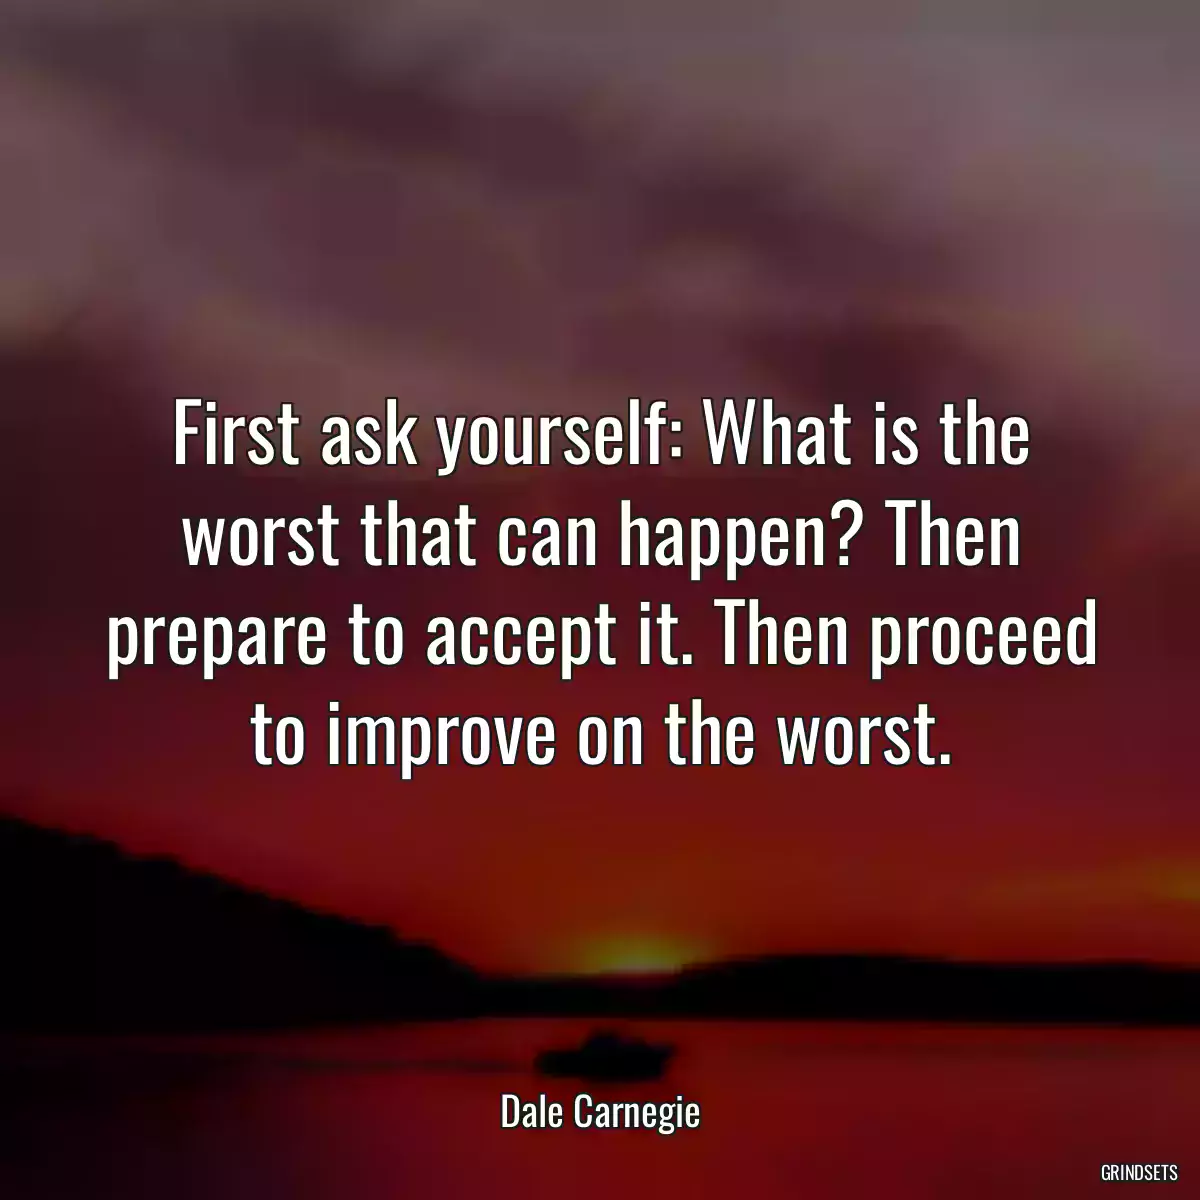 First ask yourself: What is the worst that can happen? Then prepare to accept it. Then proceed to improve on the worst.